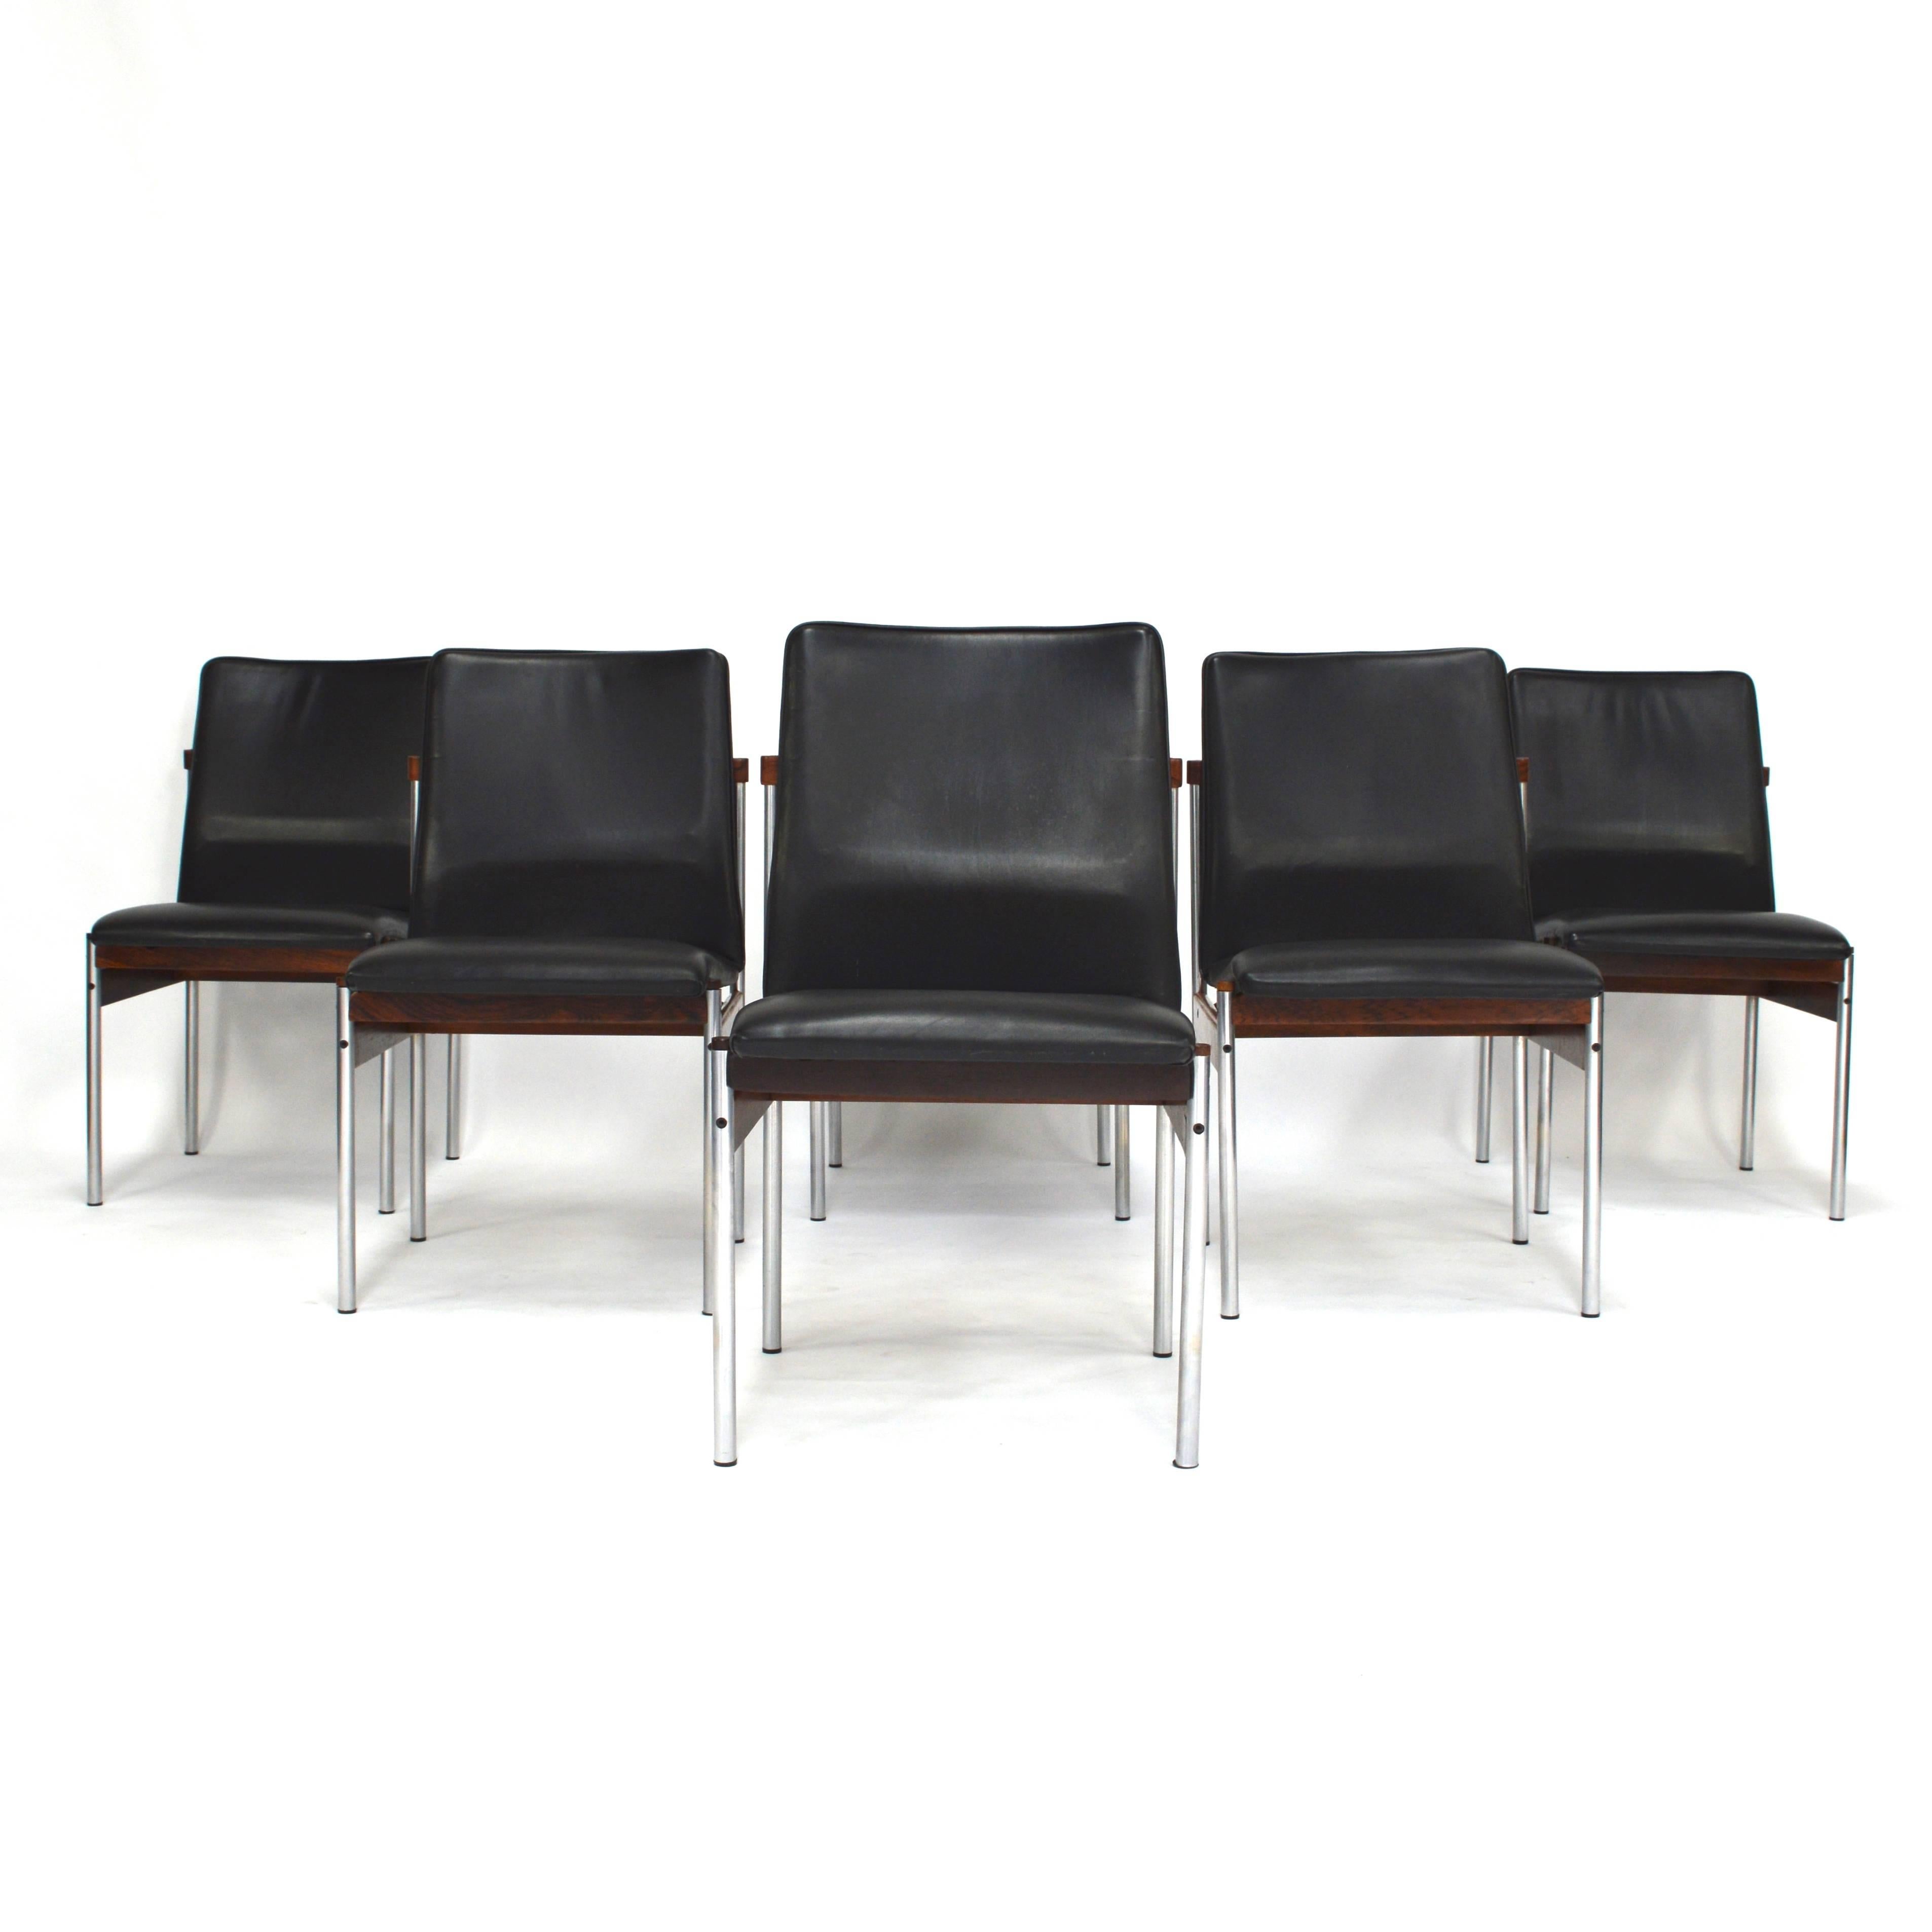 Mid-20th Century Set of six Black Leather and Brazilian Rosewood Dining Chairs, 1960s